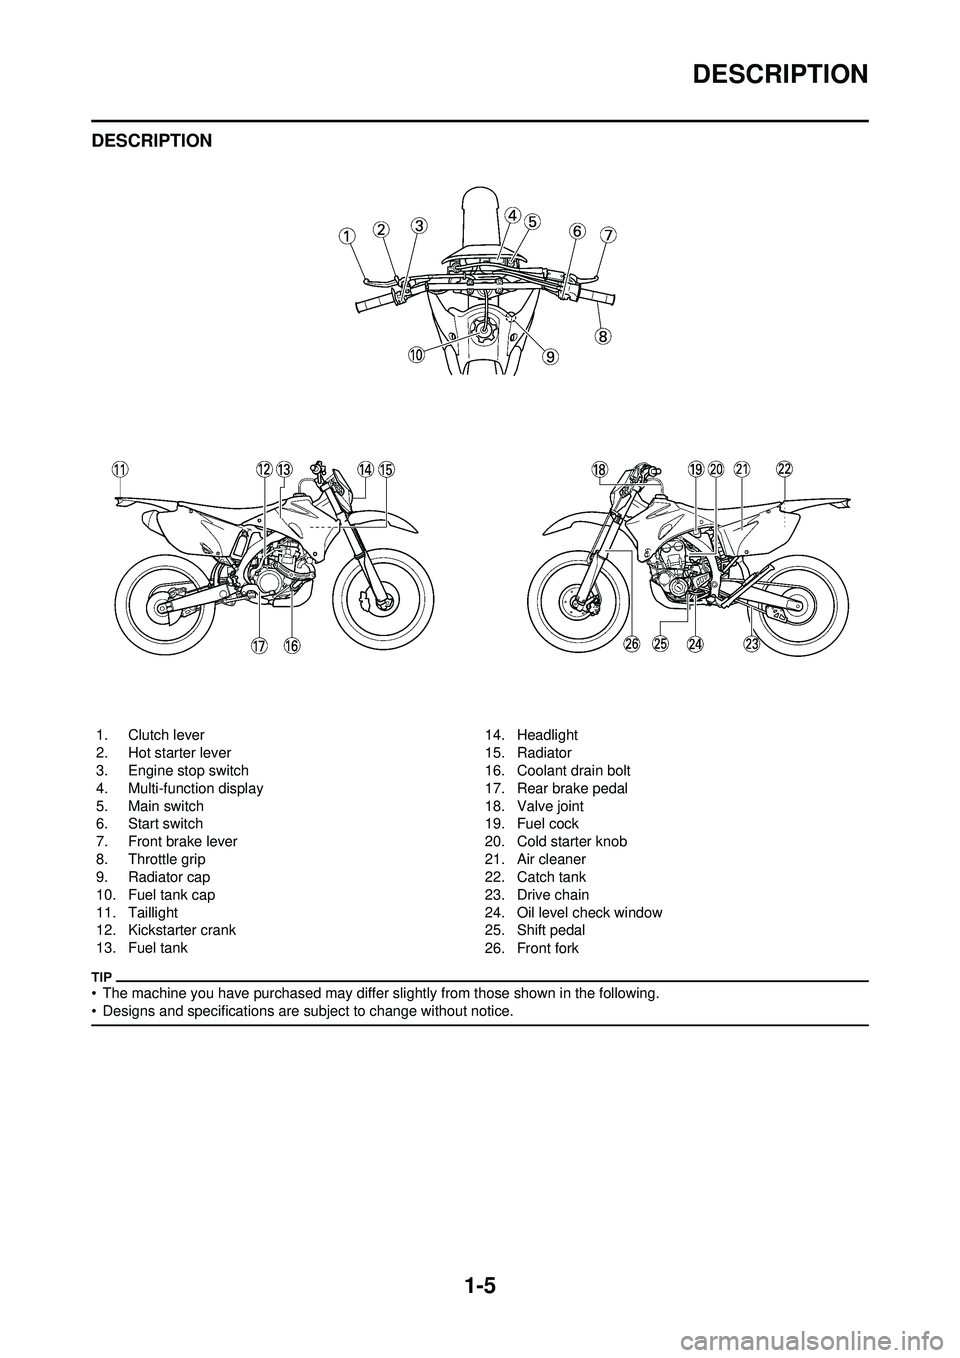 YAMAHA WR 250F 2010  Owners Manual 1-5
DESCRIPTION
DESCRIPTION
• The machine you have purchased may differ slightly from those shown in the following.
• Designs and specifications are subject to change without notice.
1. Clutch lev